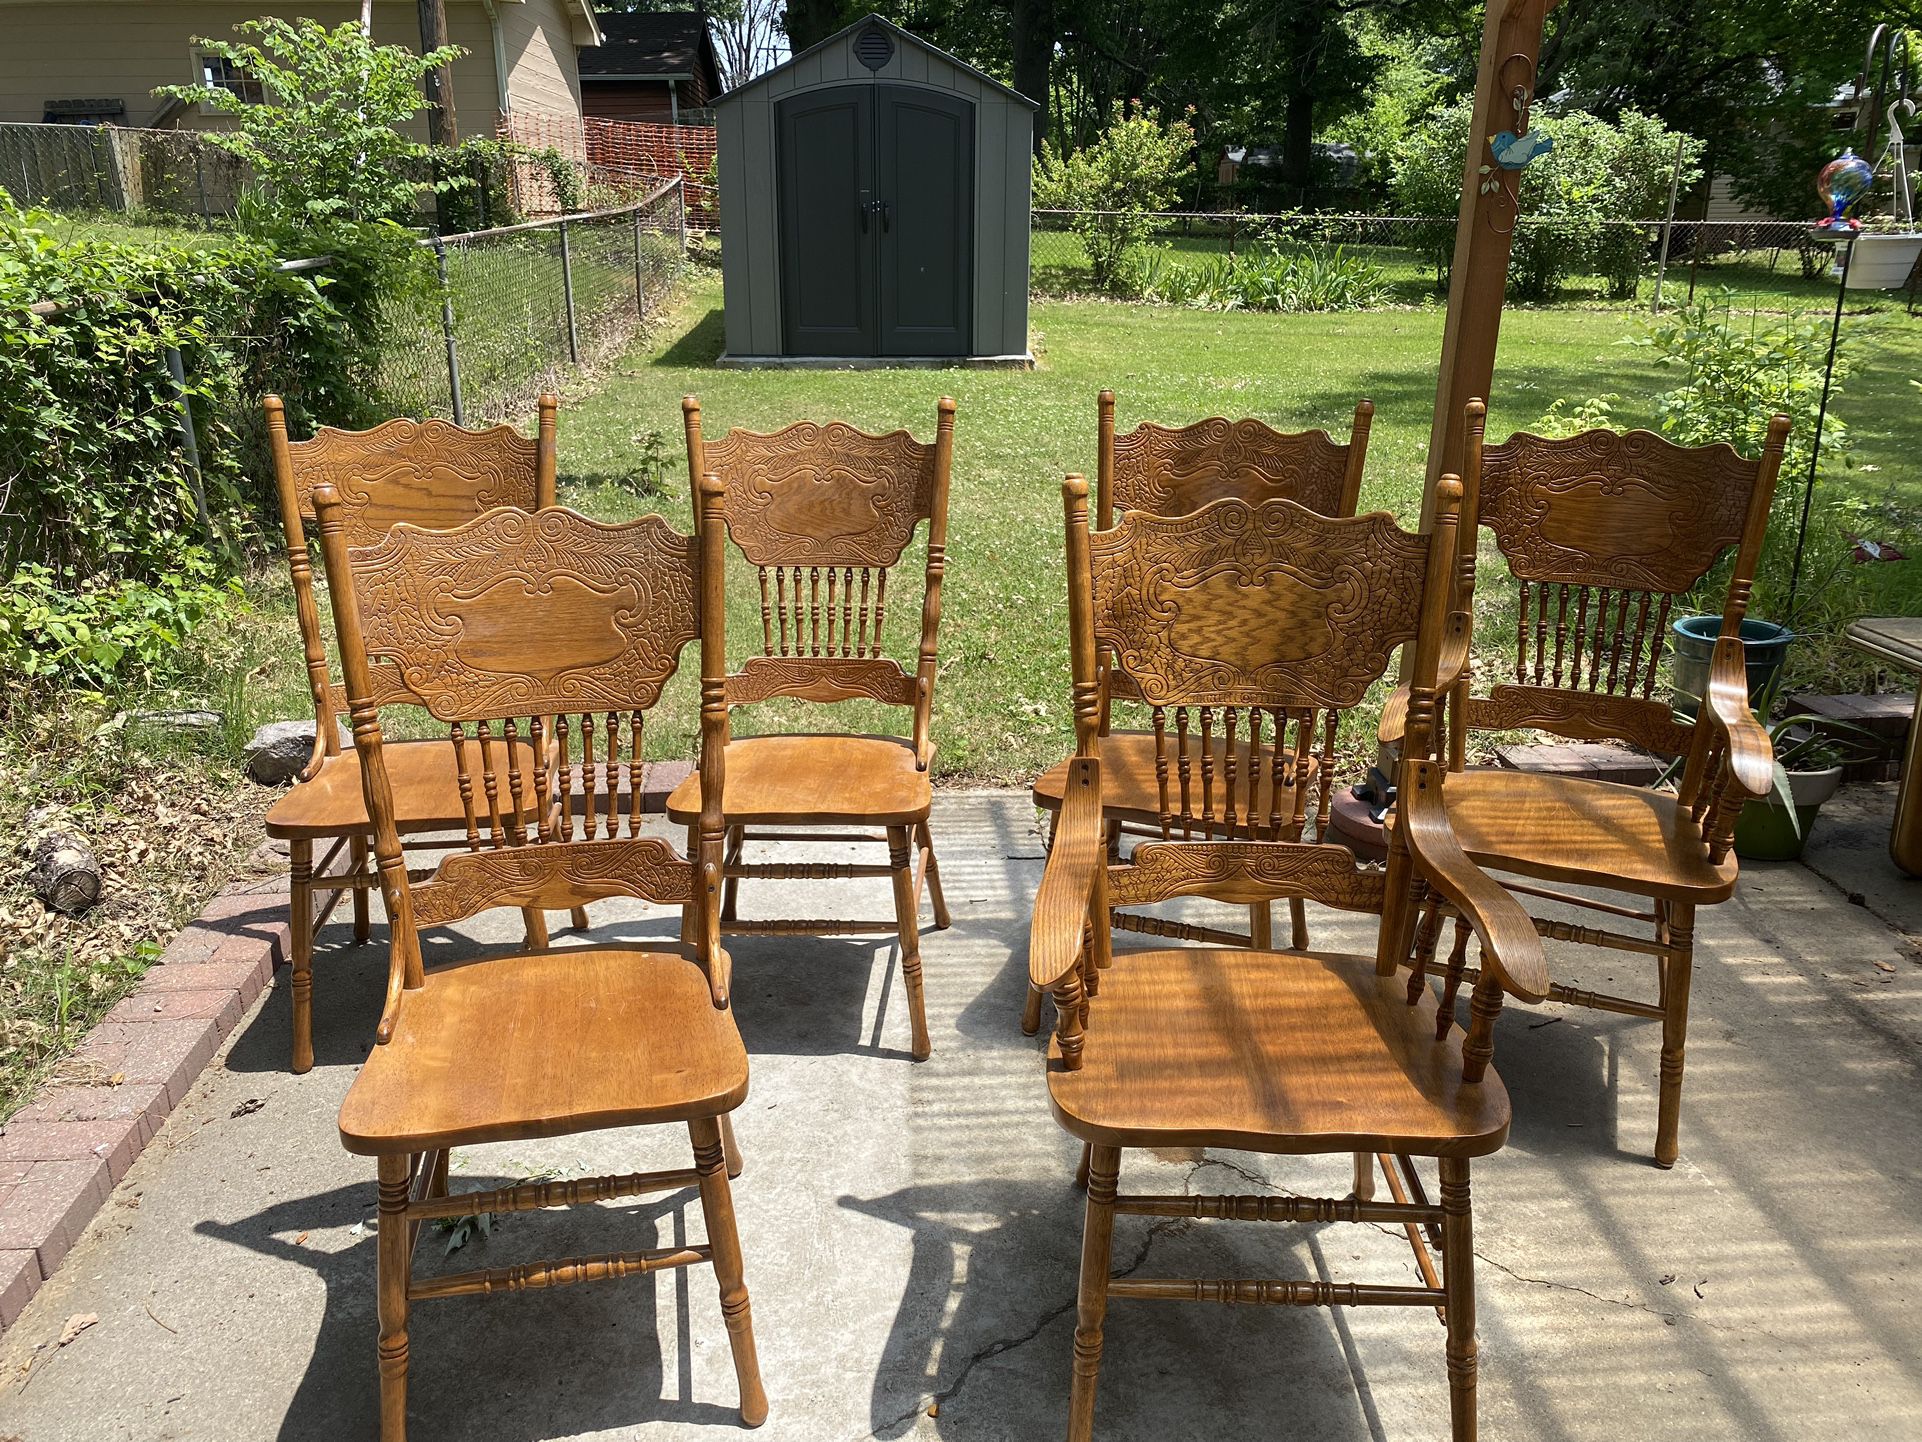 Set Of 6 Chairs